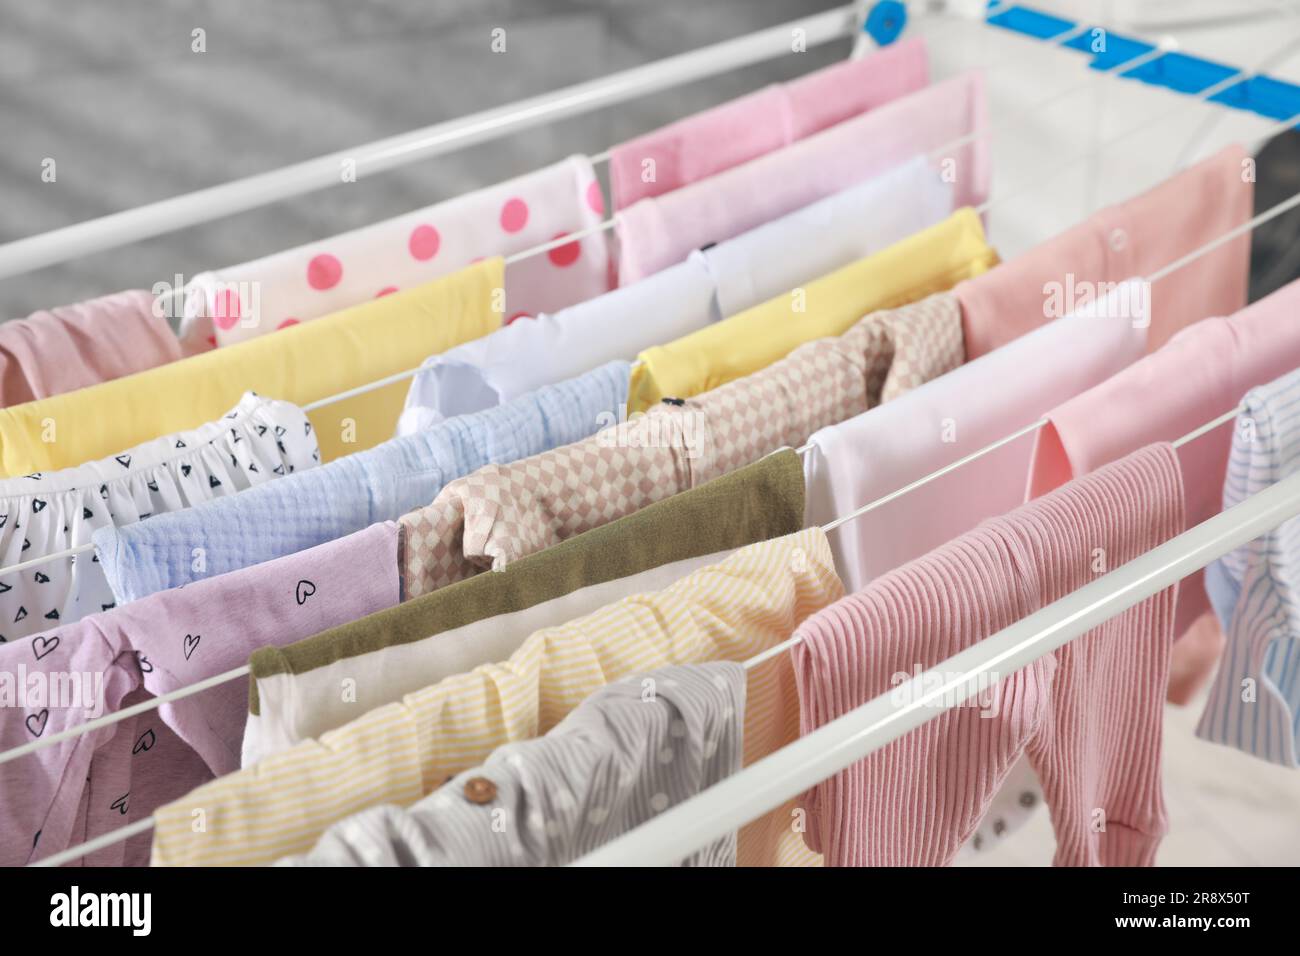 Clean laundry hanging on drying rack, closeup Stock Photo